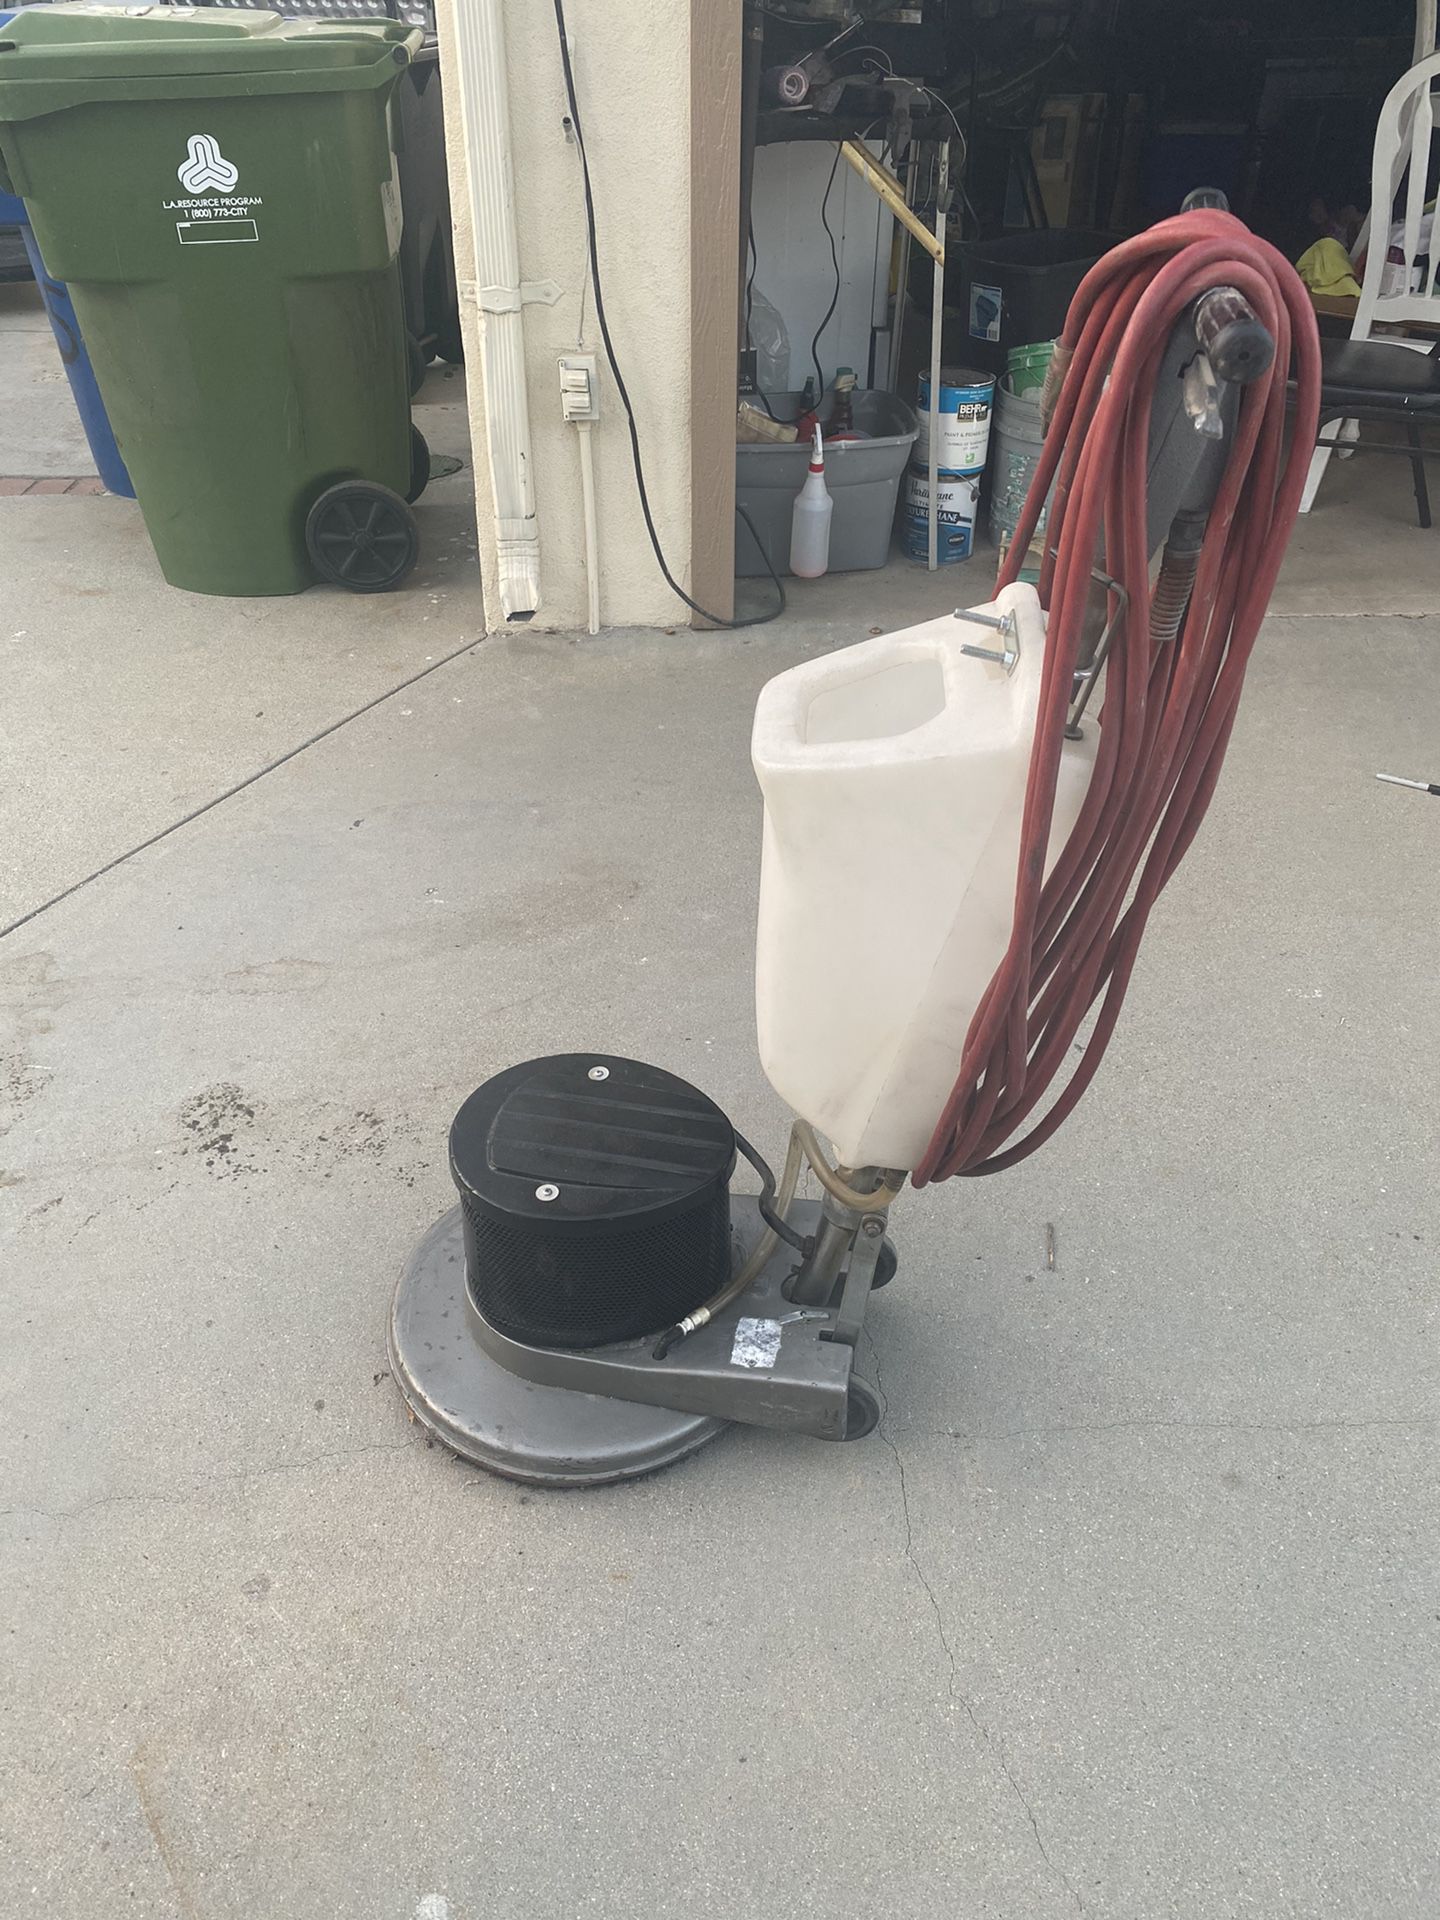 Car wash and detail 15 RUPES polisher for Sale in Los Angeles, CA - OfferUp